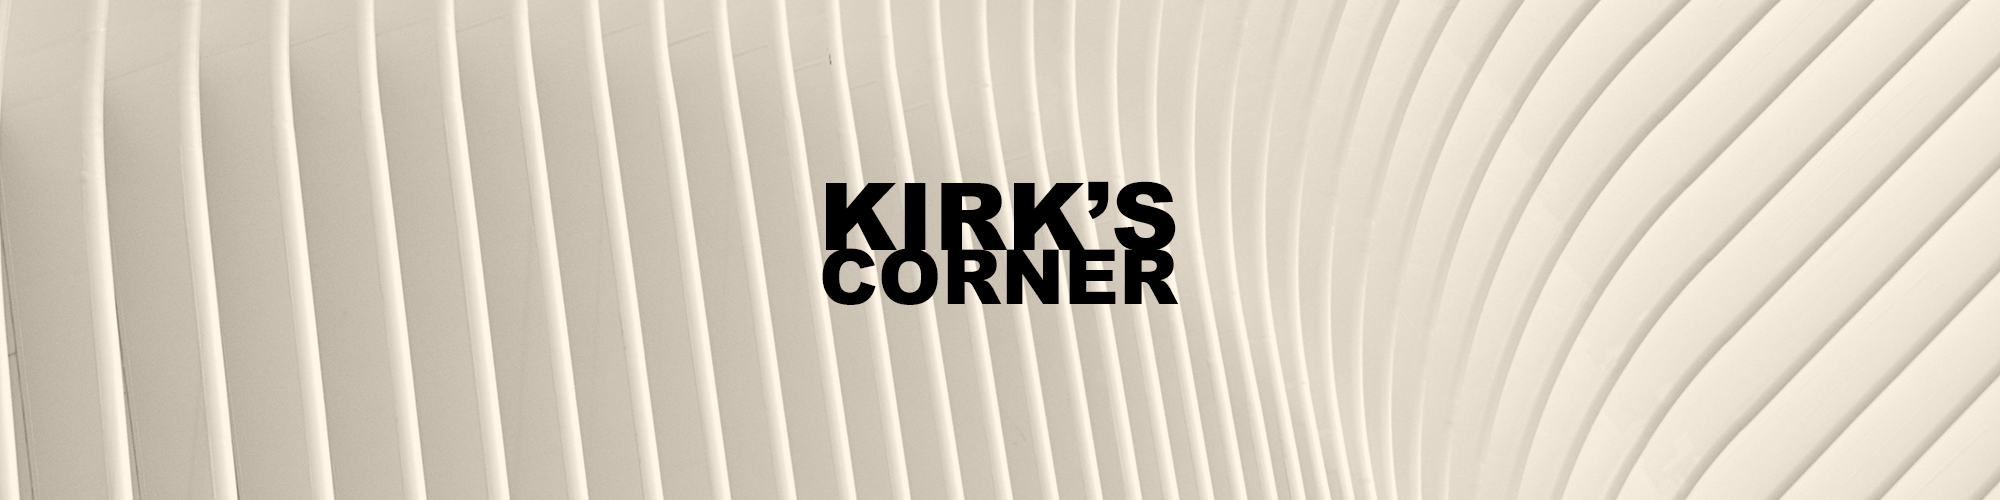 Kirk's Corner 004: 'The Lion The Beast The Beat' Album Review